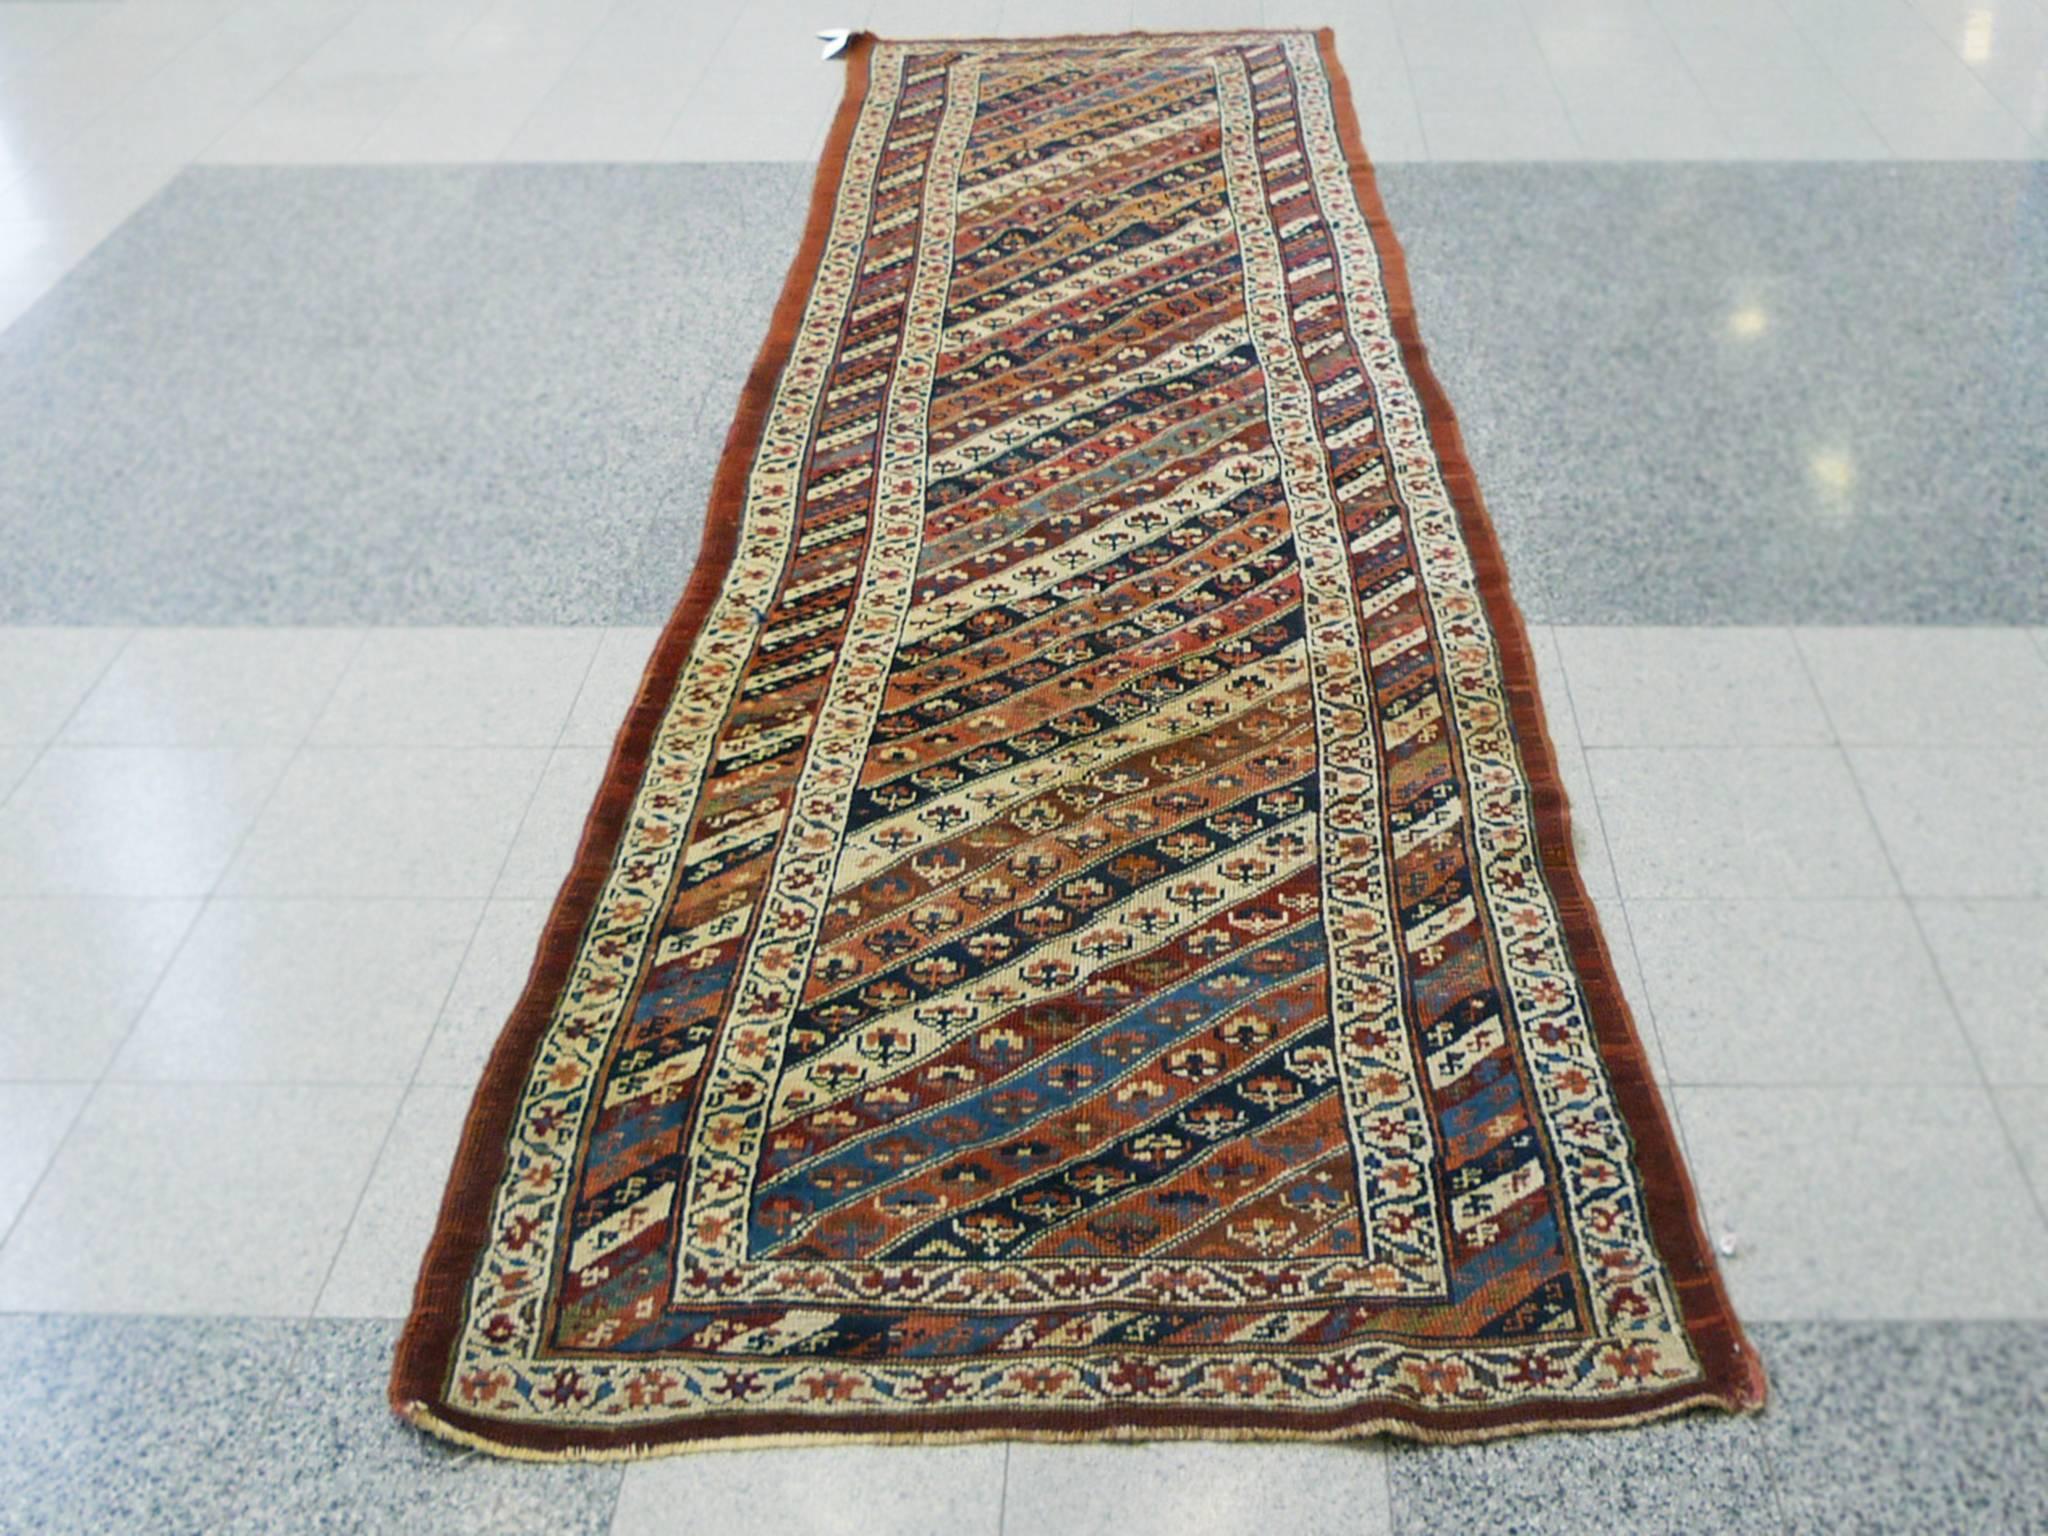 This richly patterned and textured runner rug is antique Persian Bidjar. It was handwoven in the Early 20th century. Its design consists of a central rectangle with diagonal stripes in yellow, pink, blue, and red hues. Surrounding this field is a